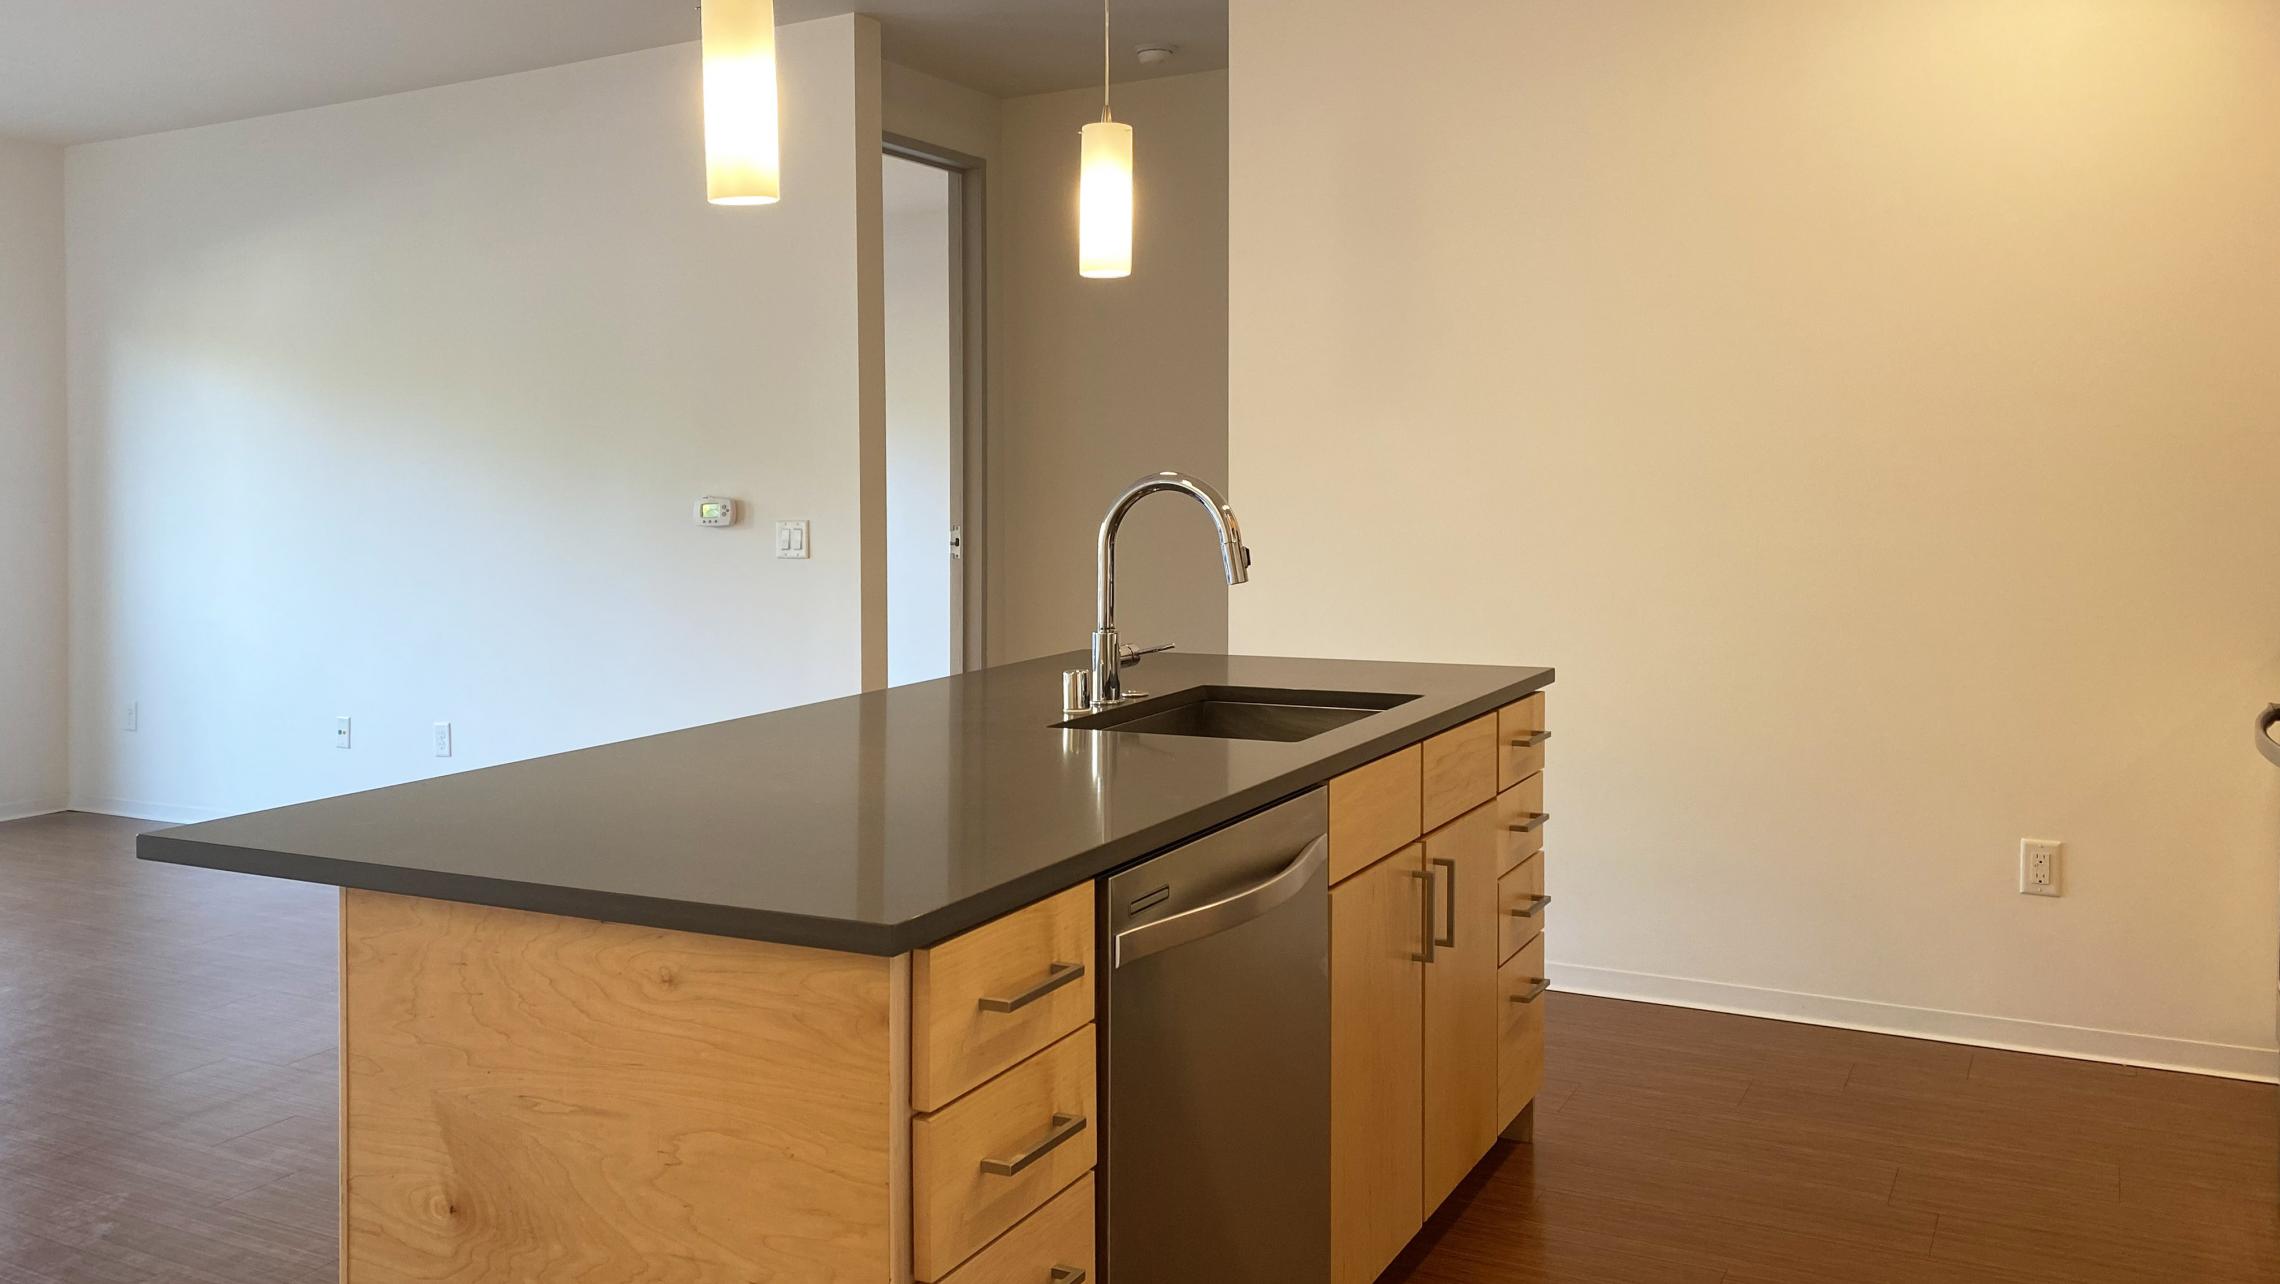 SEVEN27-at-The-Yards-Apartment-116-One-Bedroom-Modern-Upscale-Luxury-Design-Radiant-Heating-Fitness-Lounge-Fireplace-Courtyard-Downtown-Madison-Cats-Dogs-Lifestyle-Natural-Light